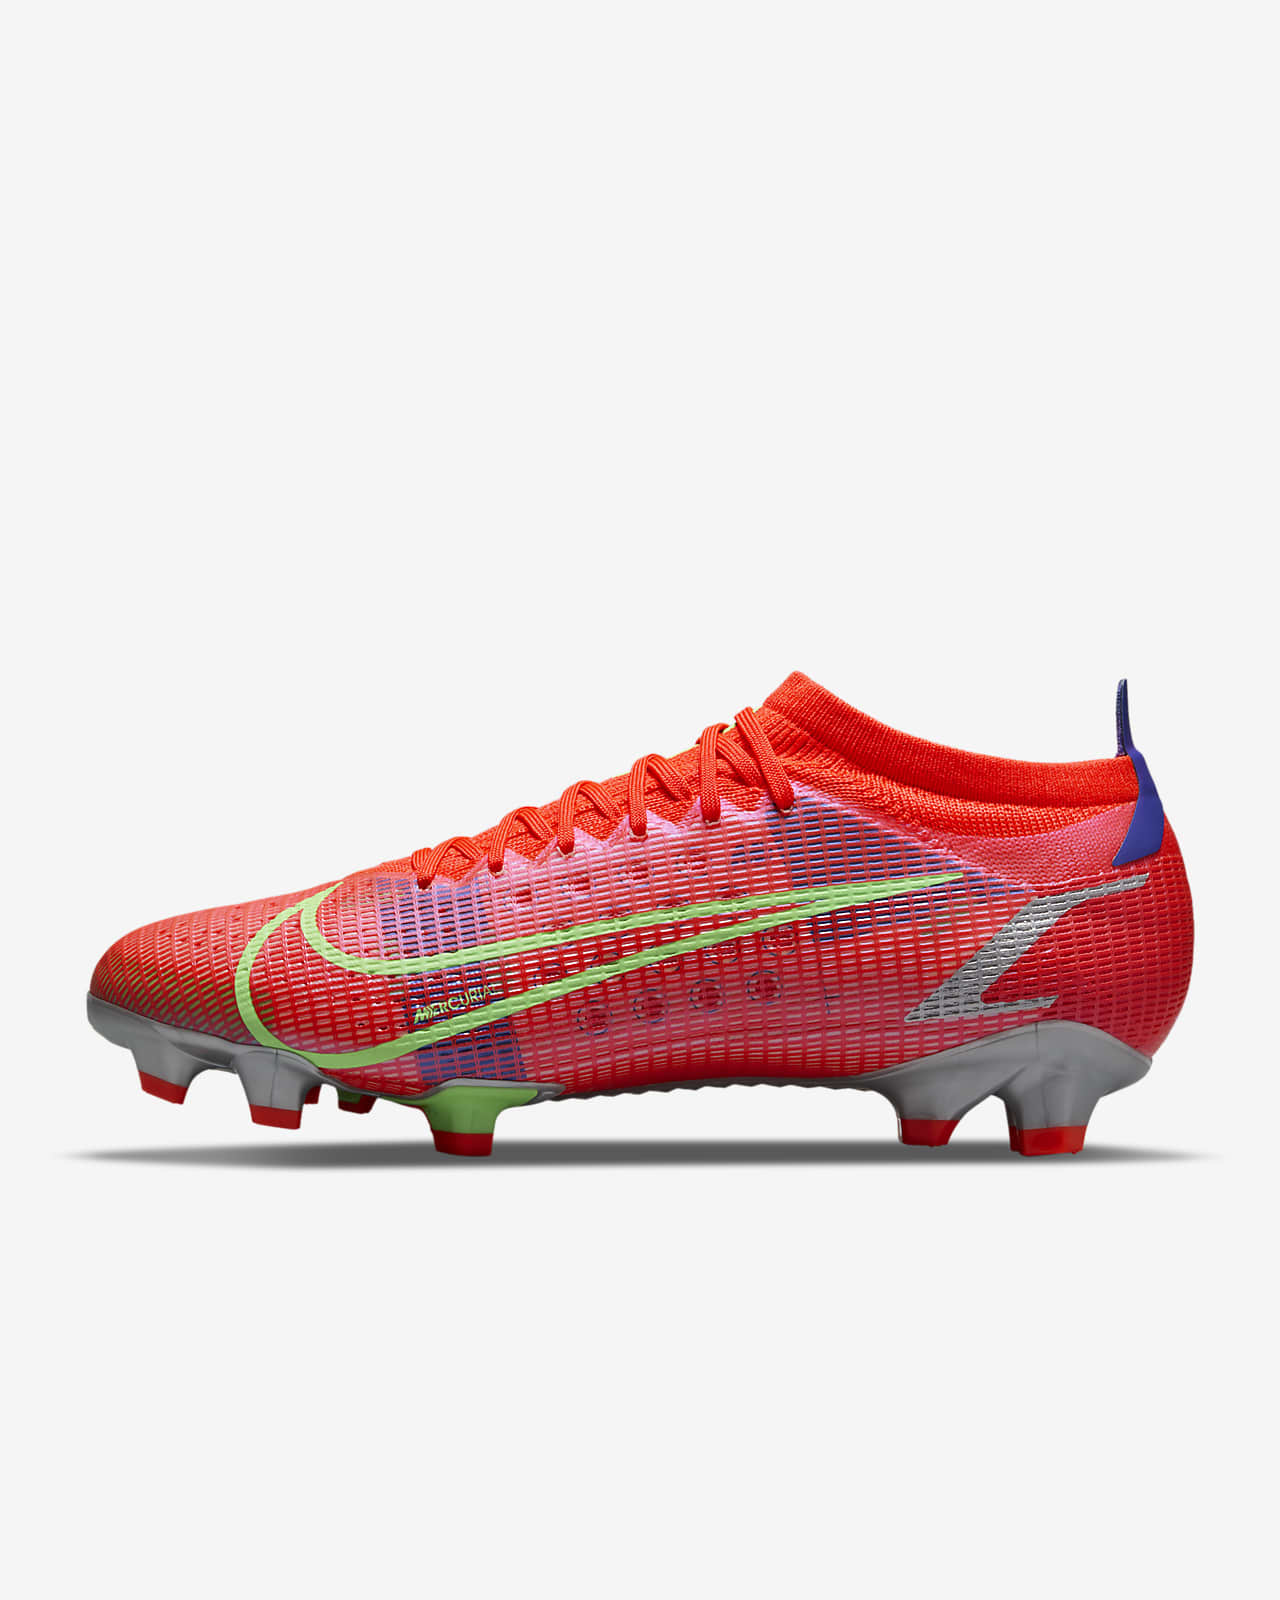 nike mercurial latest boots